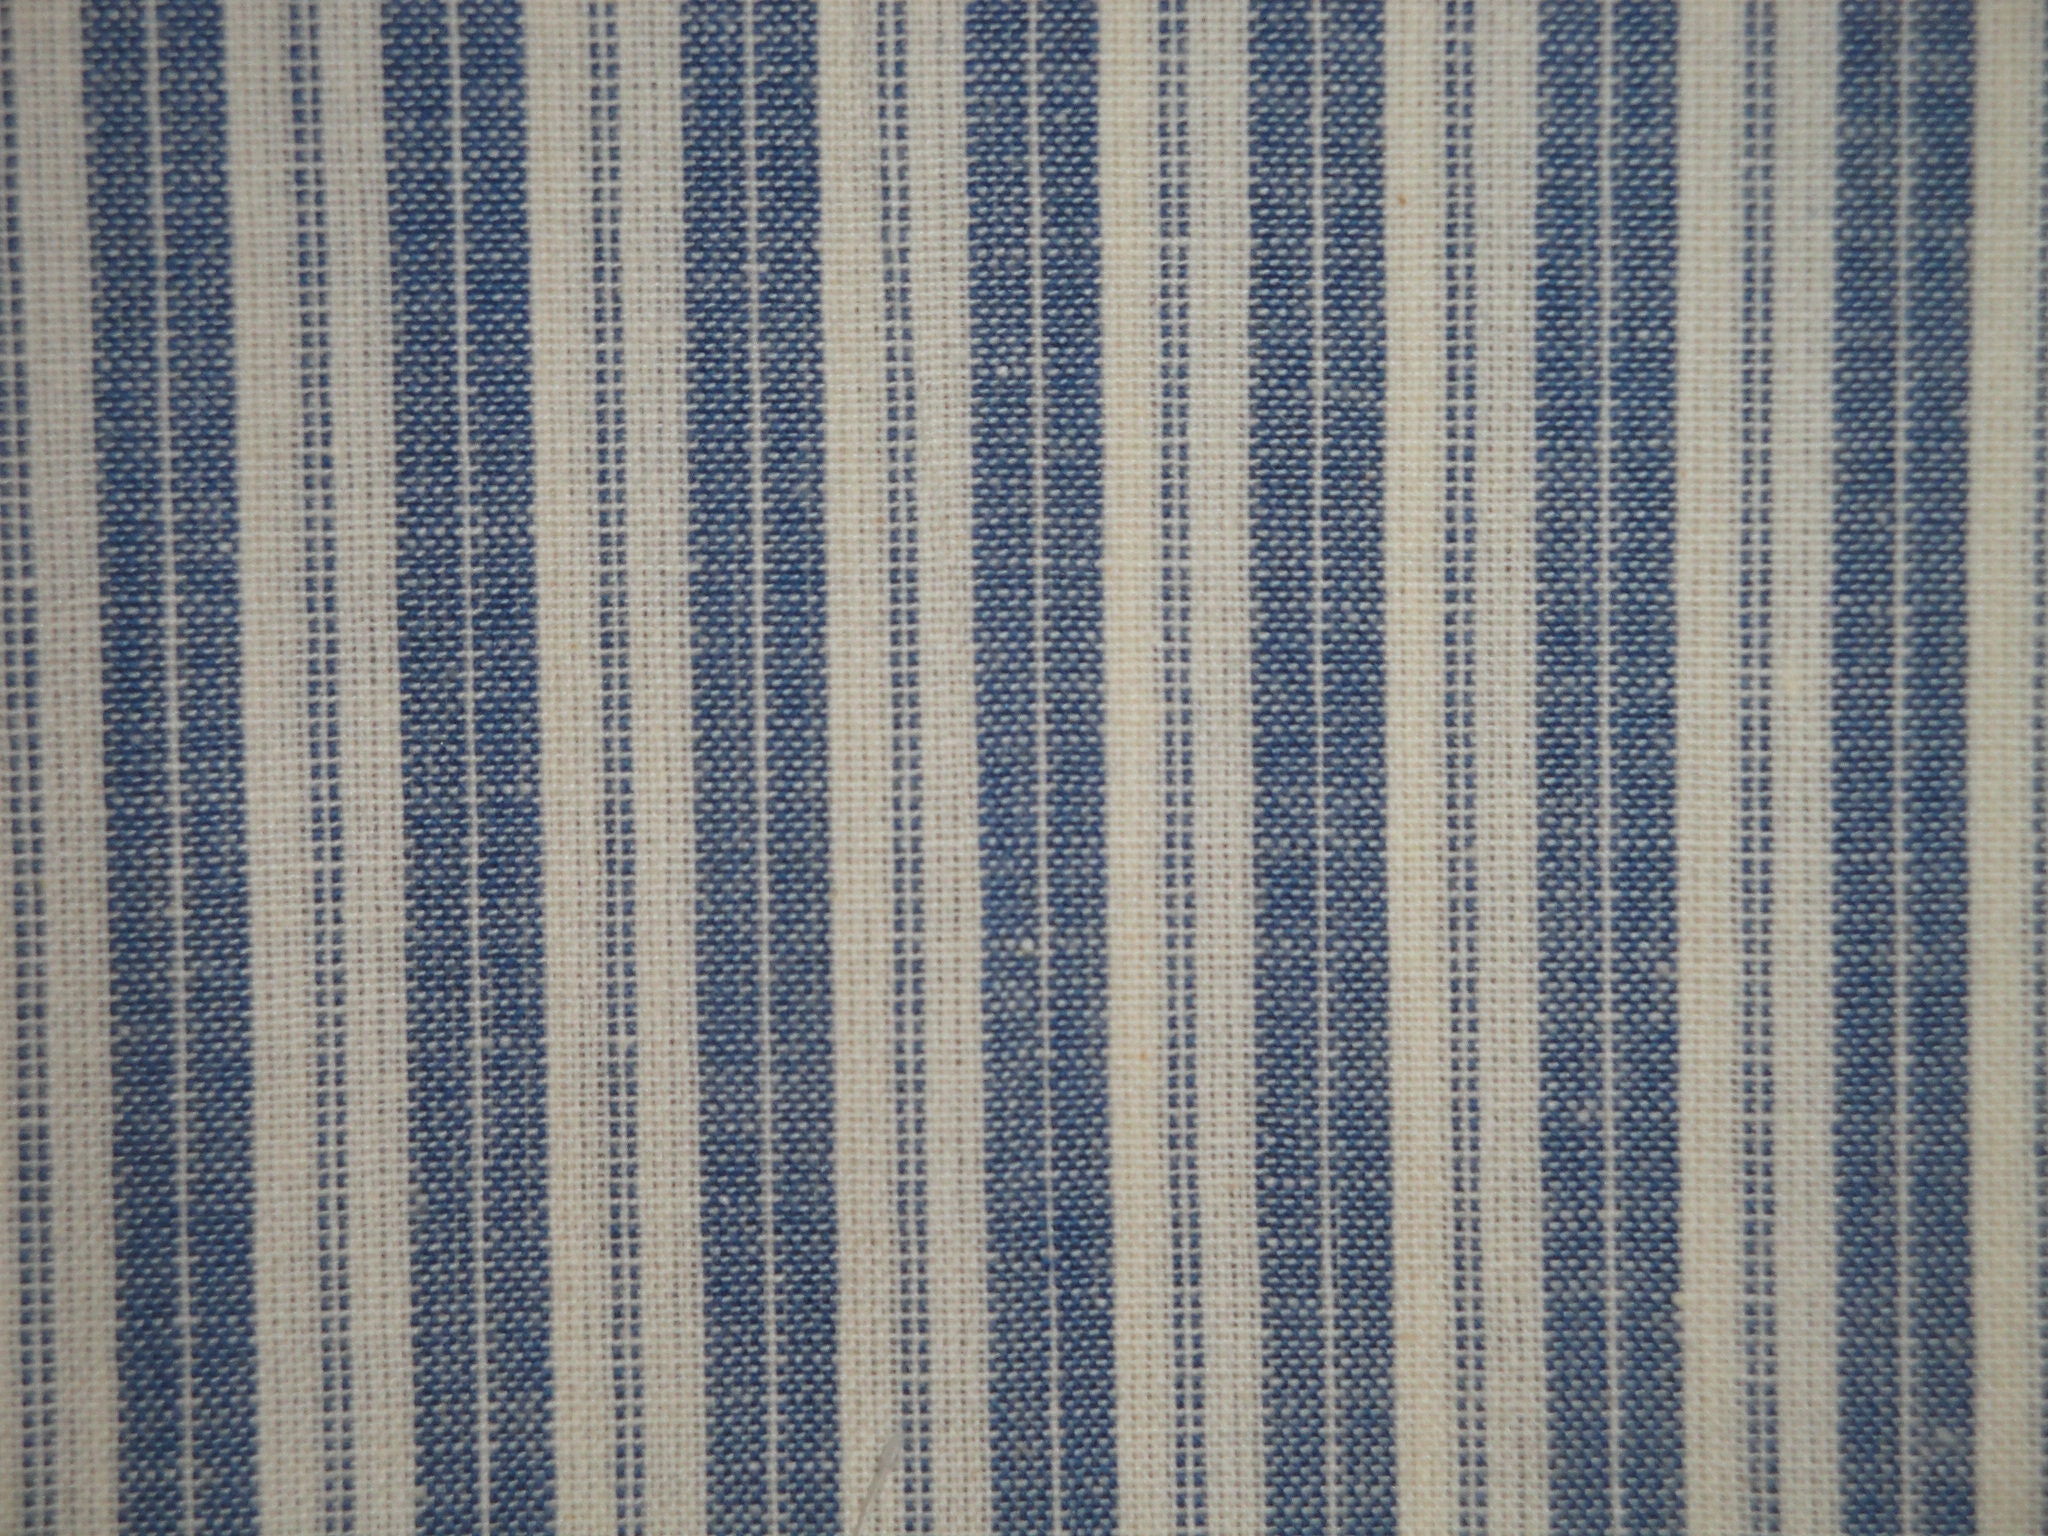 54 Blue Stripe Ticking Fabric - Per Yard [BL-TICK] - $5.49 :  , Burlap for Wedding and Special Events